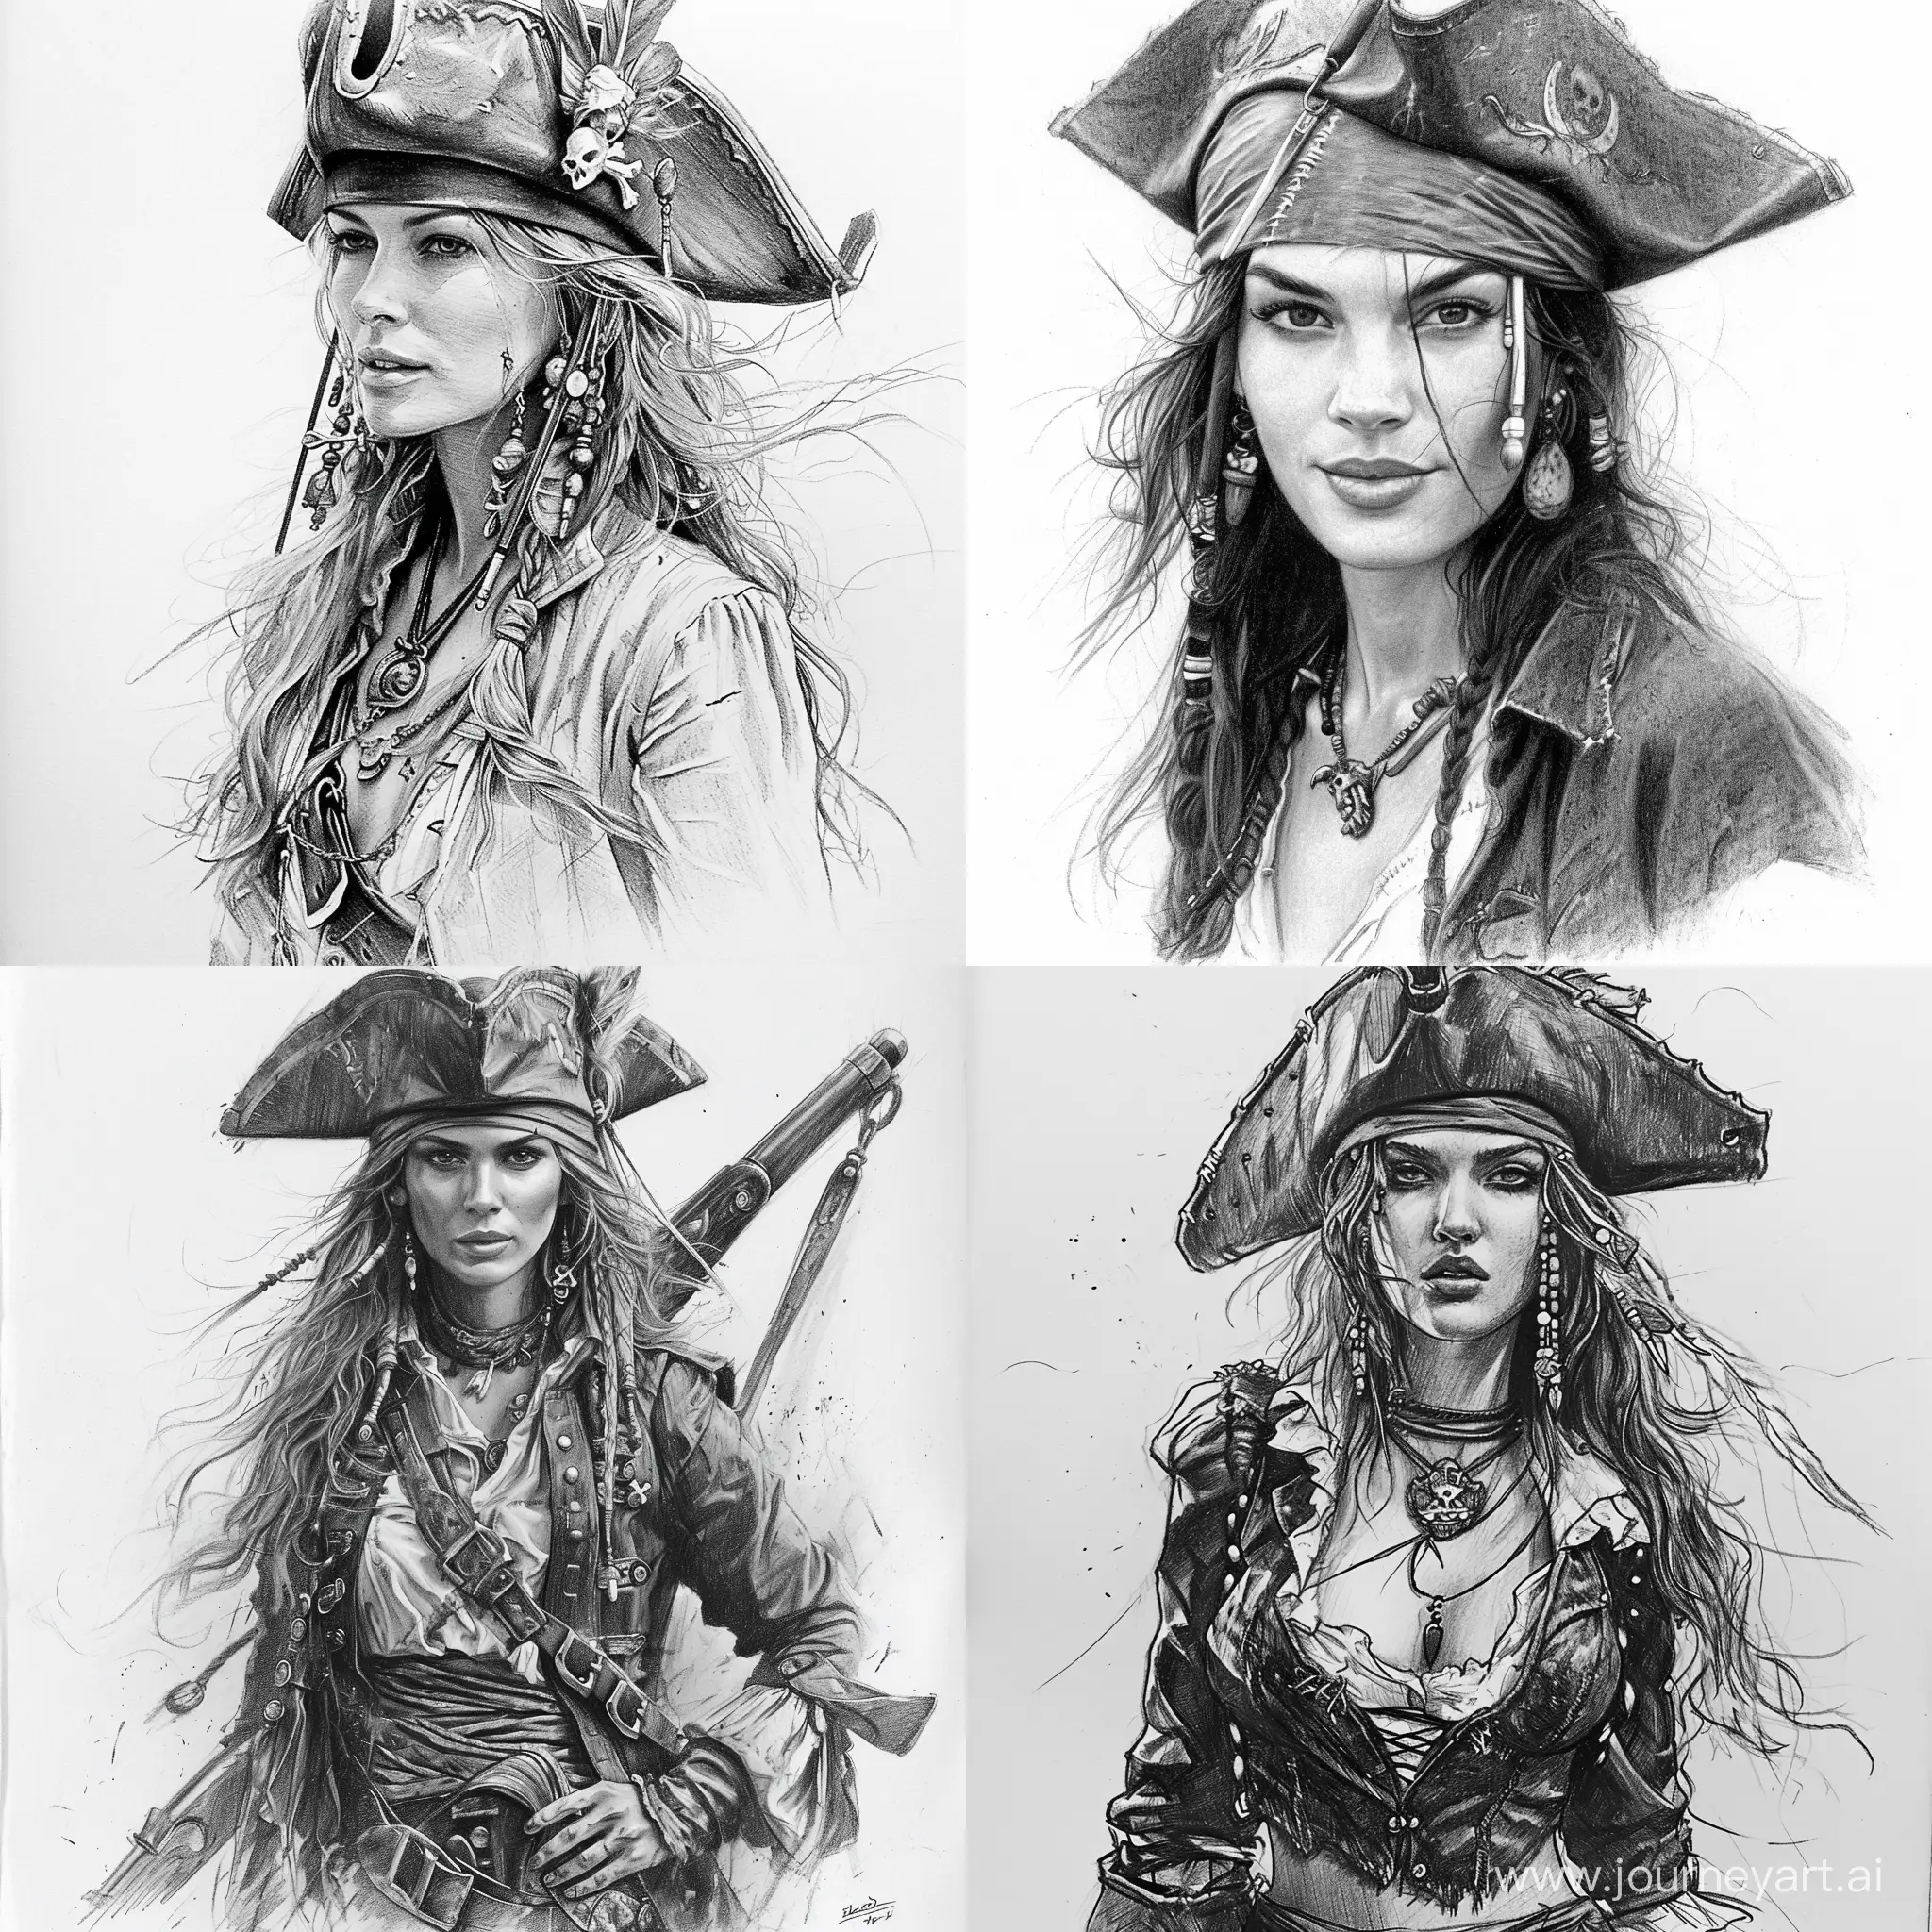 Pirate-Woman-Pencil-Sketch-Intriguing-Black-and-White-Artwork